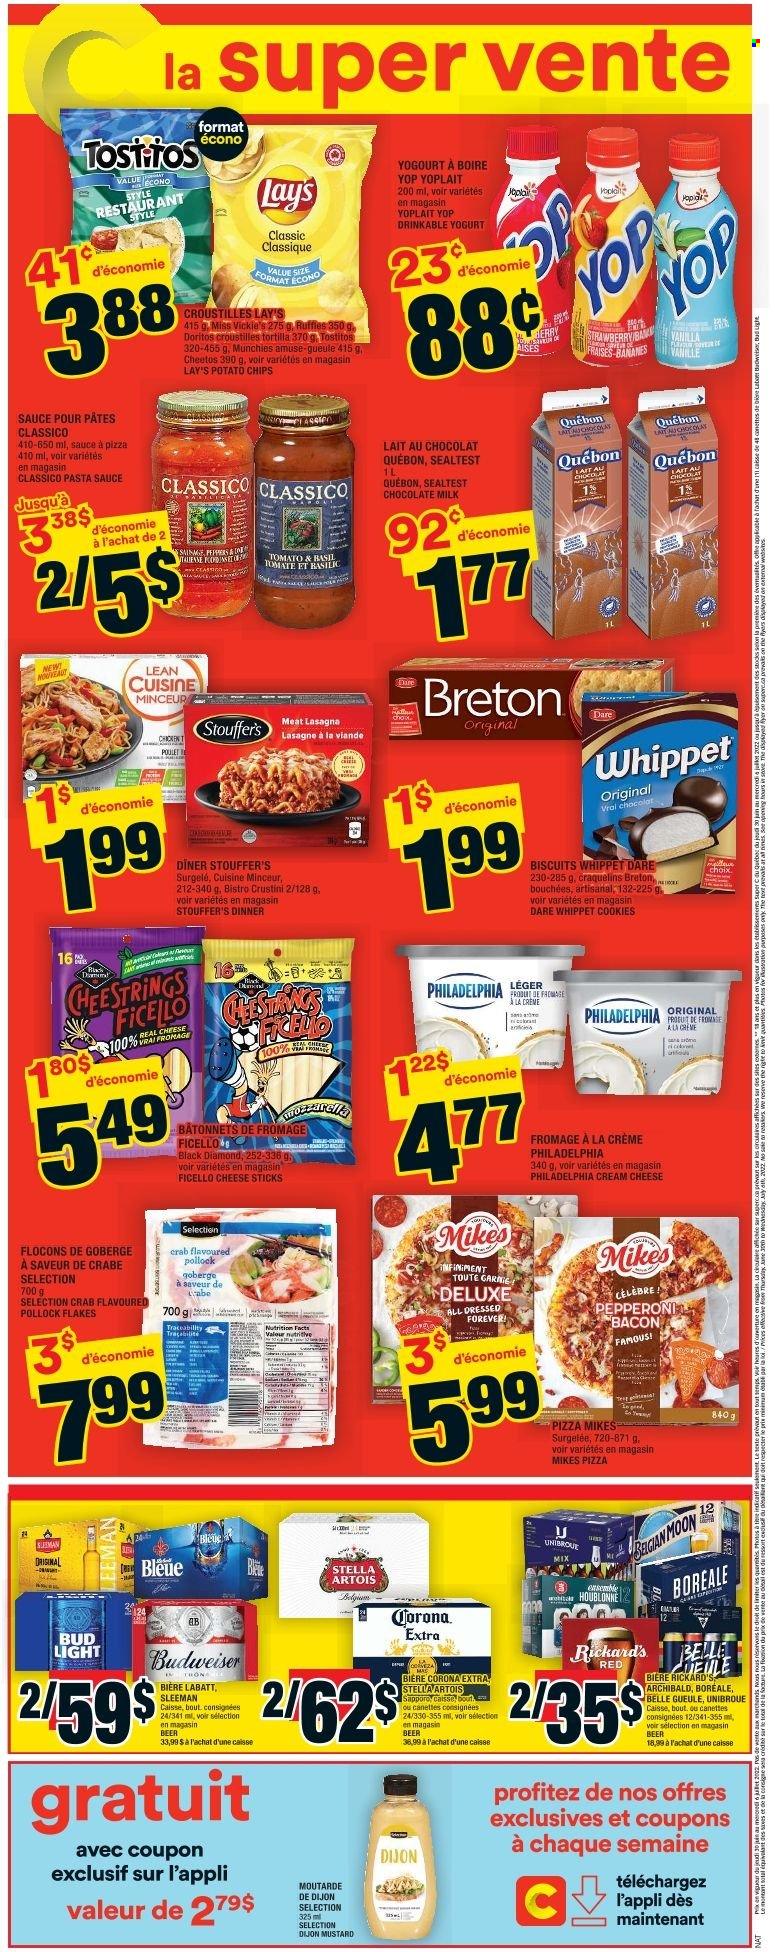 thumbnail - Super C Flyer - June 30, 2022 - July 06, 2022 - Sales products - tortillas, peppers, pollock, crab, pizza, pasta sauce, sauce, lasagna meal, Lean Cuisine, bacon, pepperoni, cream cheese, string cheese, yoghurt, Yoplait, milk, cheese sticks, Stouffer's, cookies, milk chocolate, chocolate, biscuit, Doritos, potato chips, Cheetos, chips, Lay’s, Ruffles, Tostitos, mustard, Classico, beer, Bud Light, Corona Extra, Budweiser, Stella Artois, Philadelphia. Page 2.